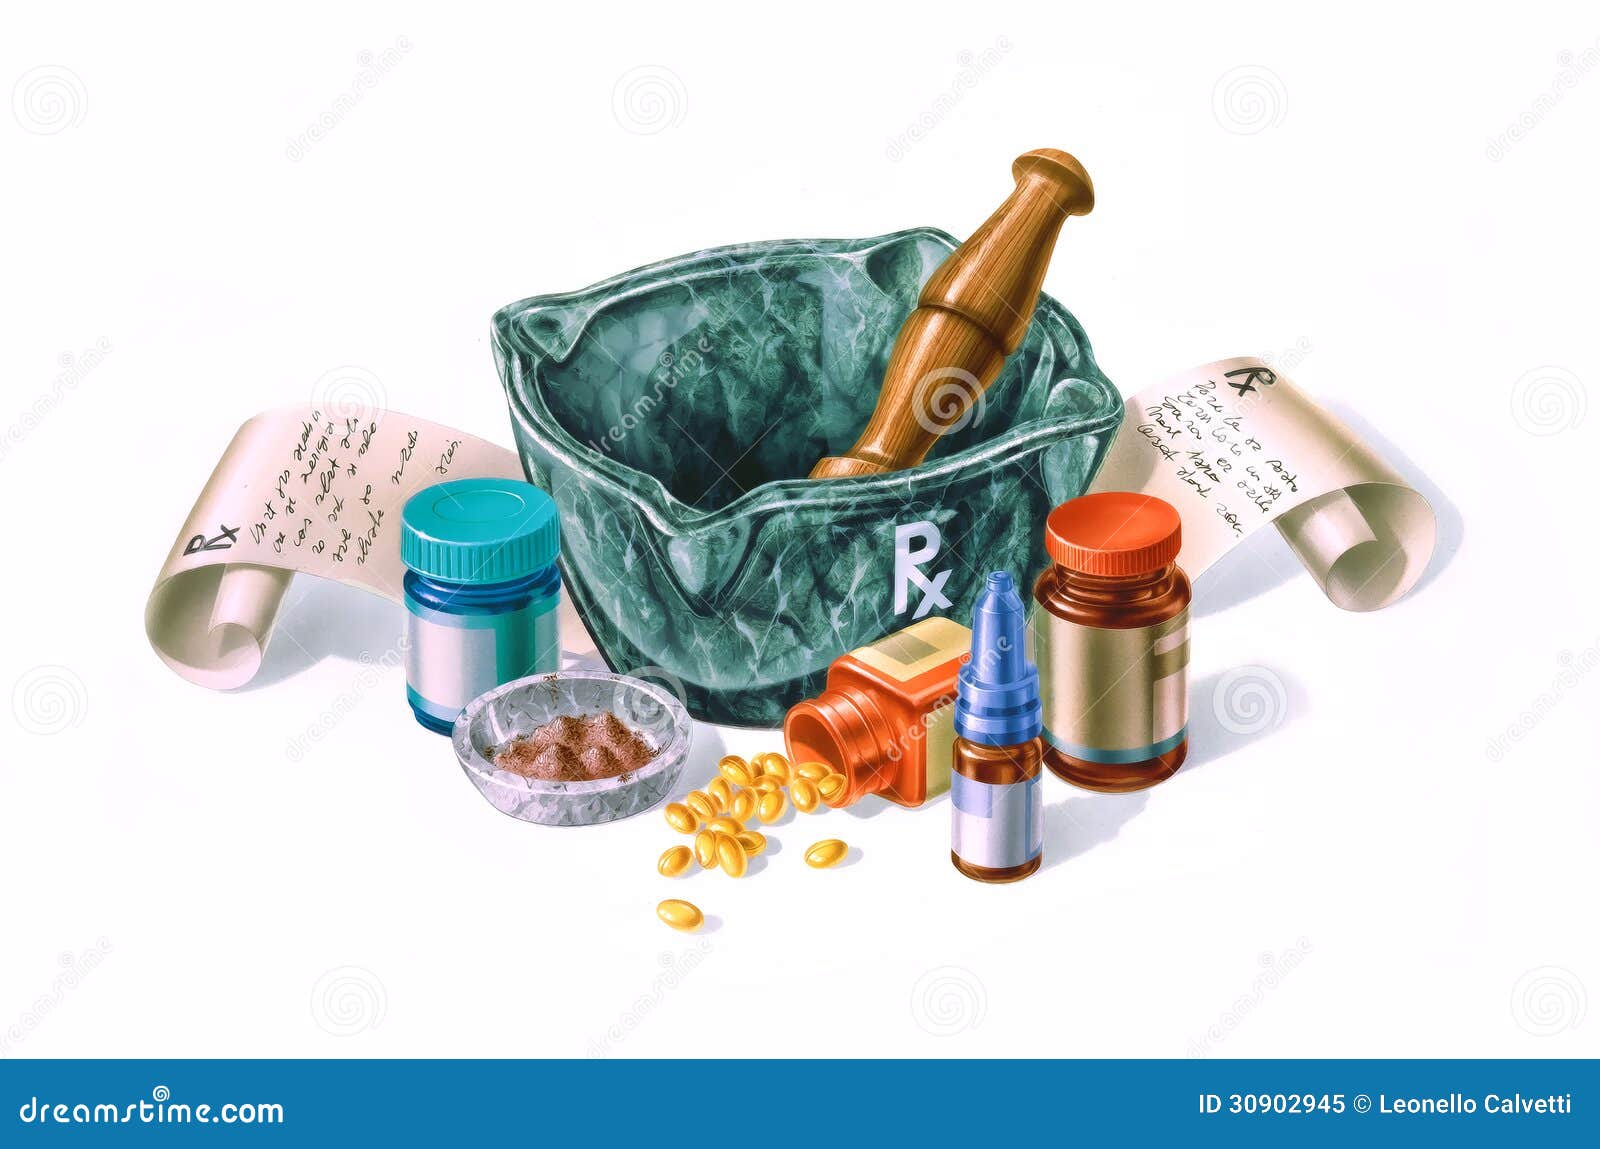 mortar surrounded by drugs, medicines and prescriptions.